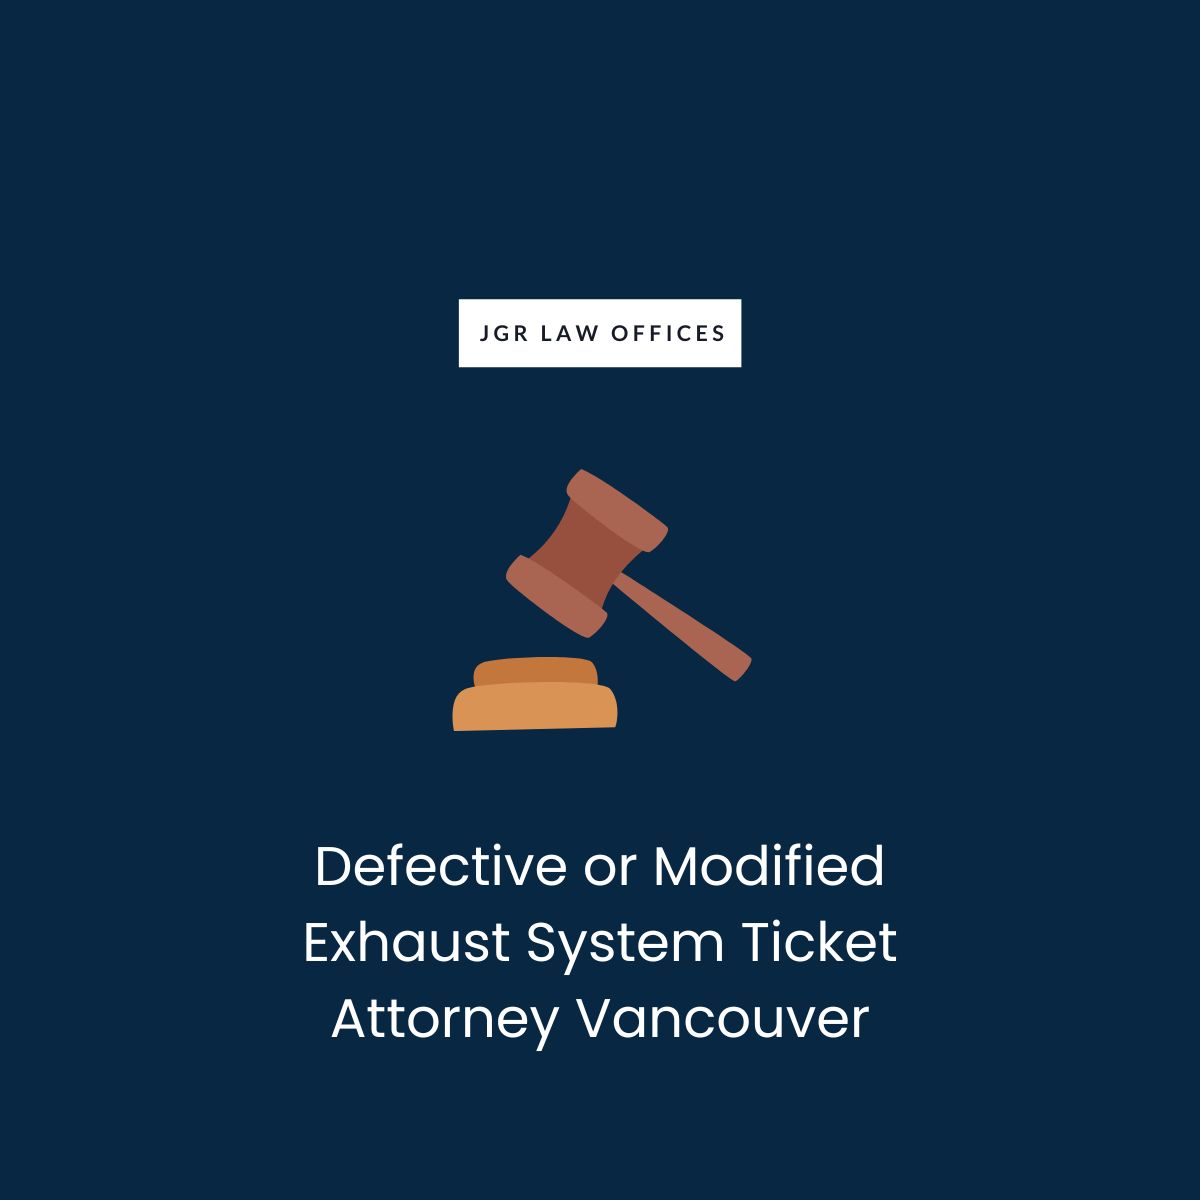 Defective or Modified Exhaust System Ticket Attorney Vancouver